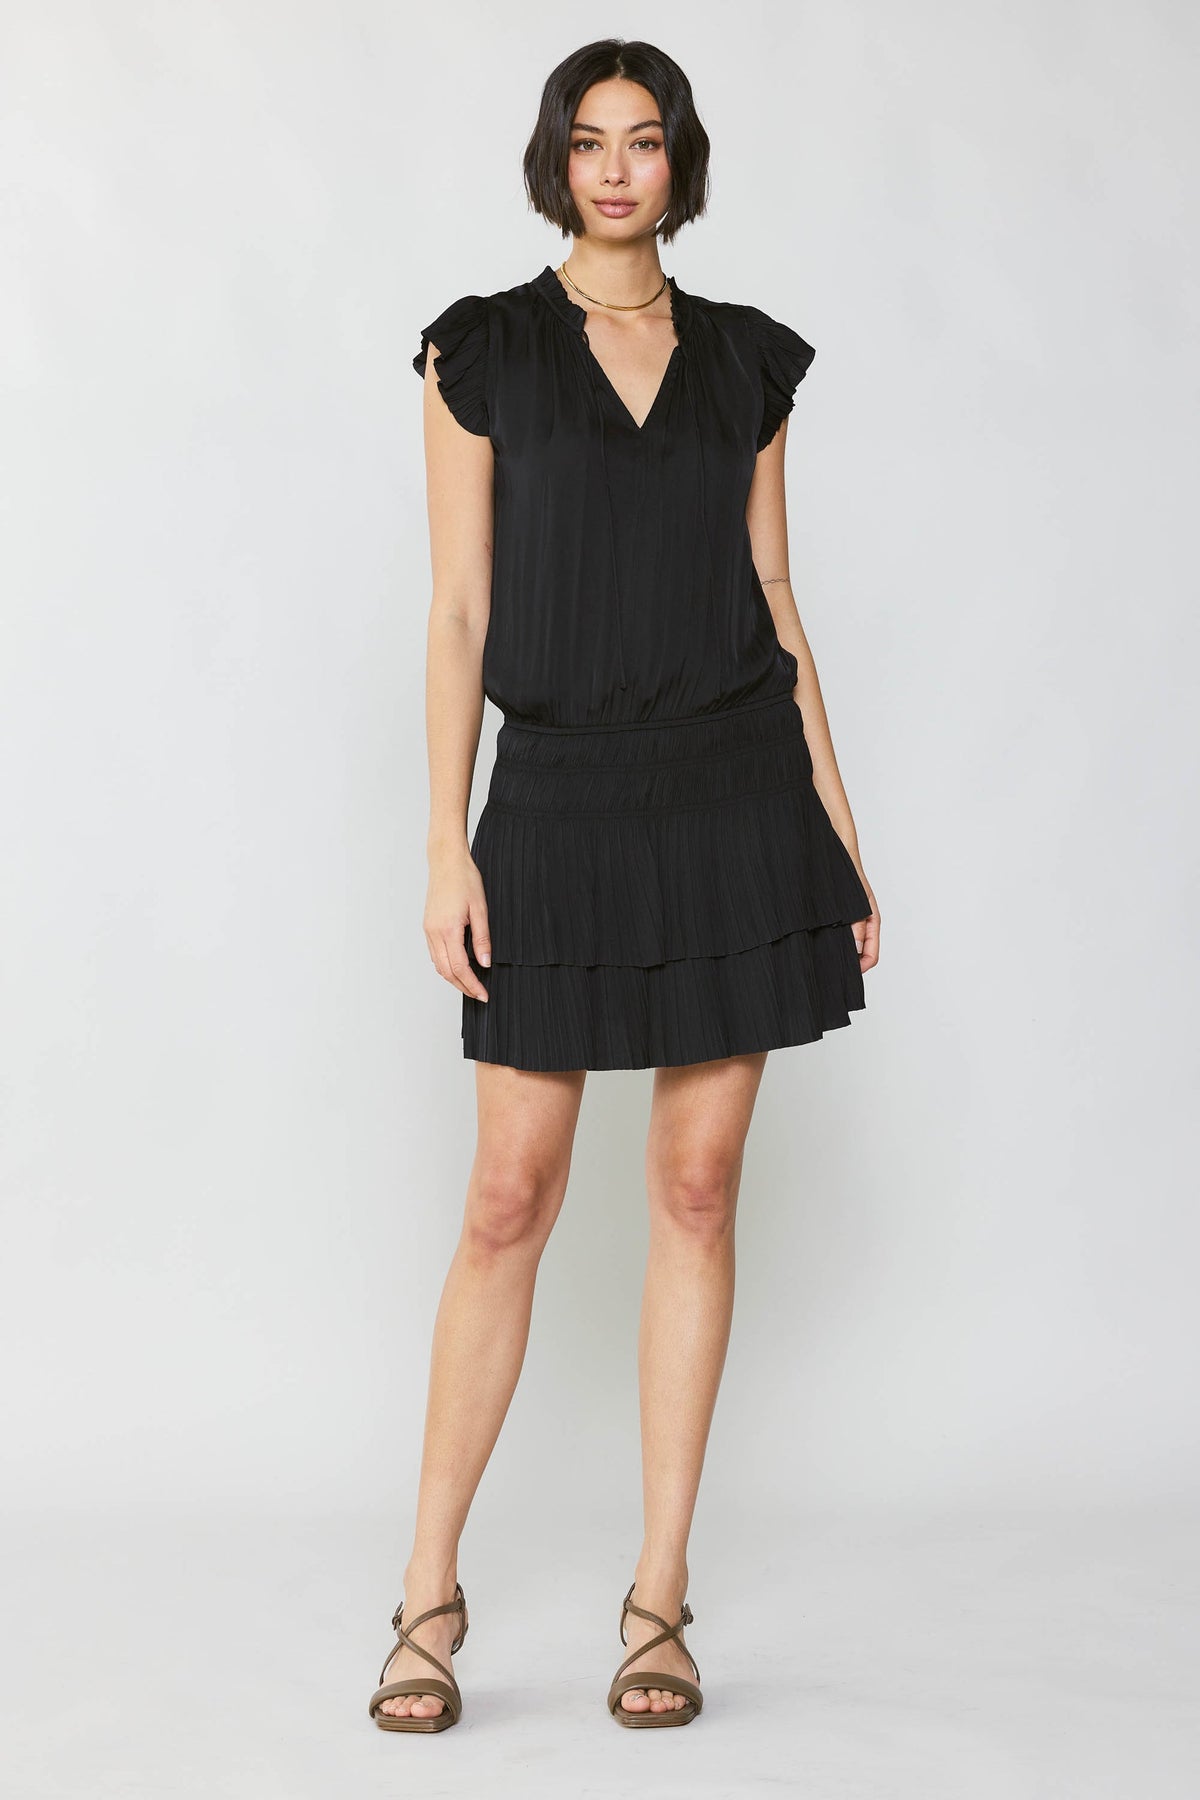 Current Air Zoey Pleated Mini Dress